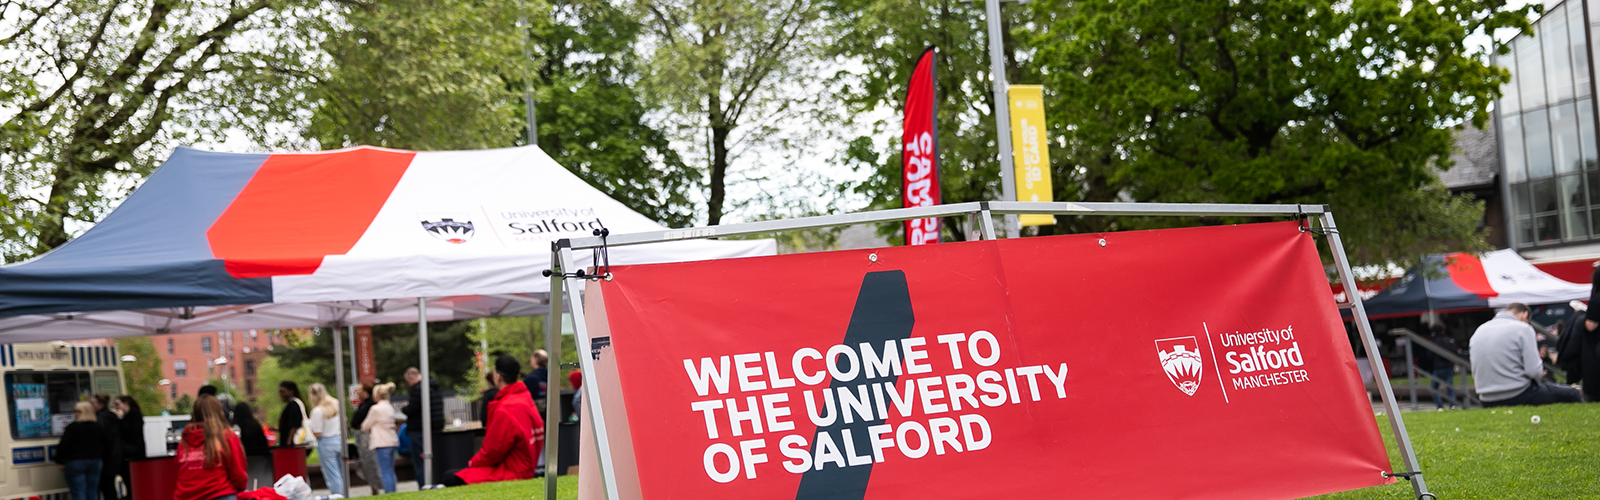 Welcome to the University of Salford sign